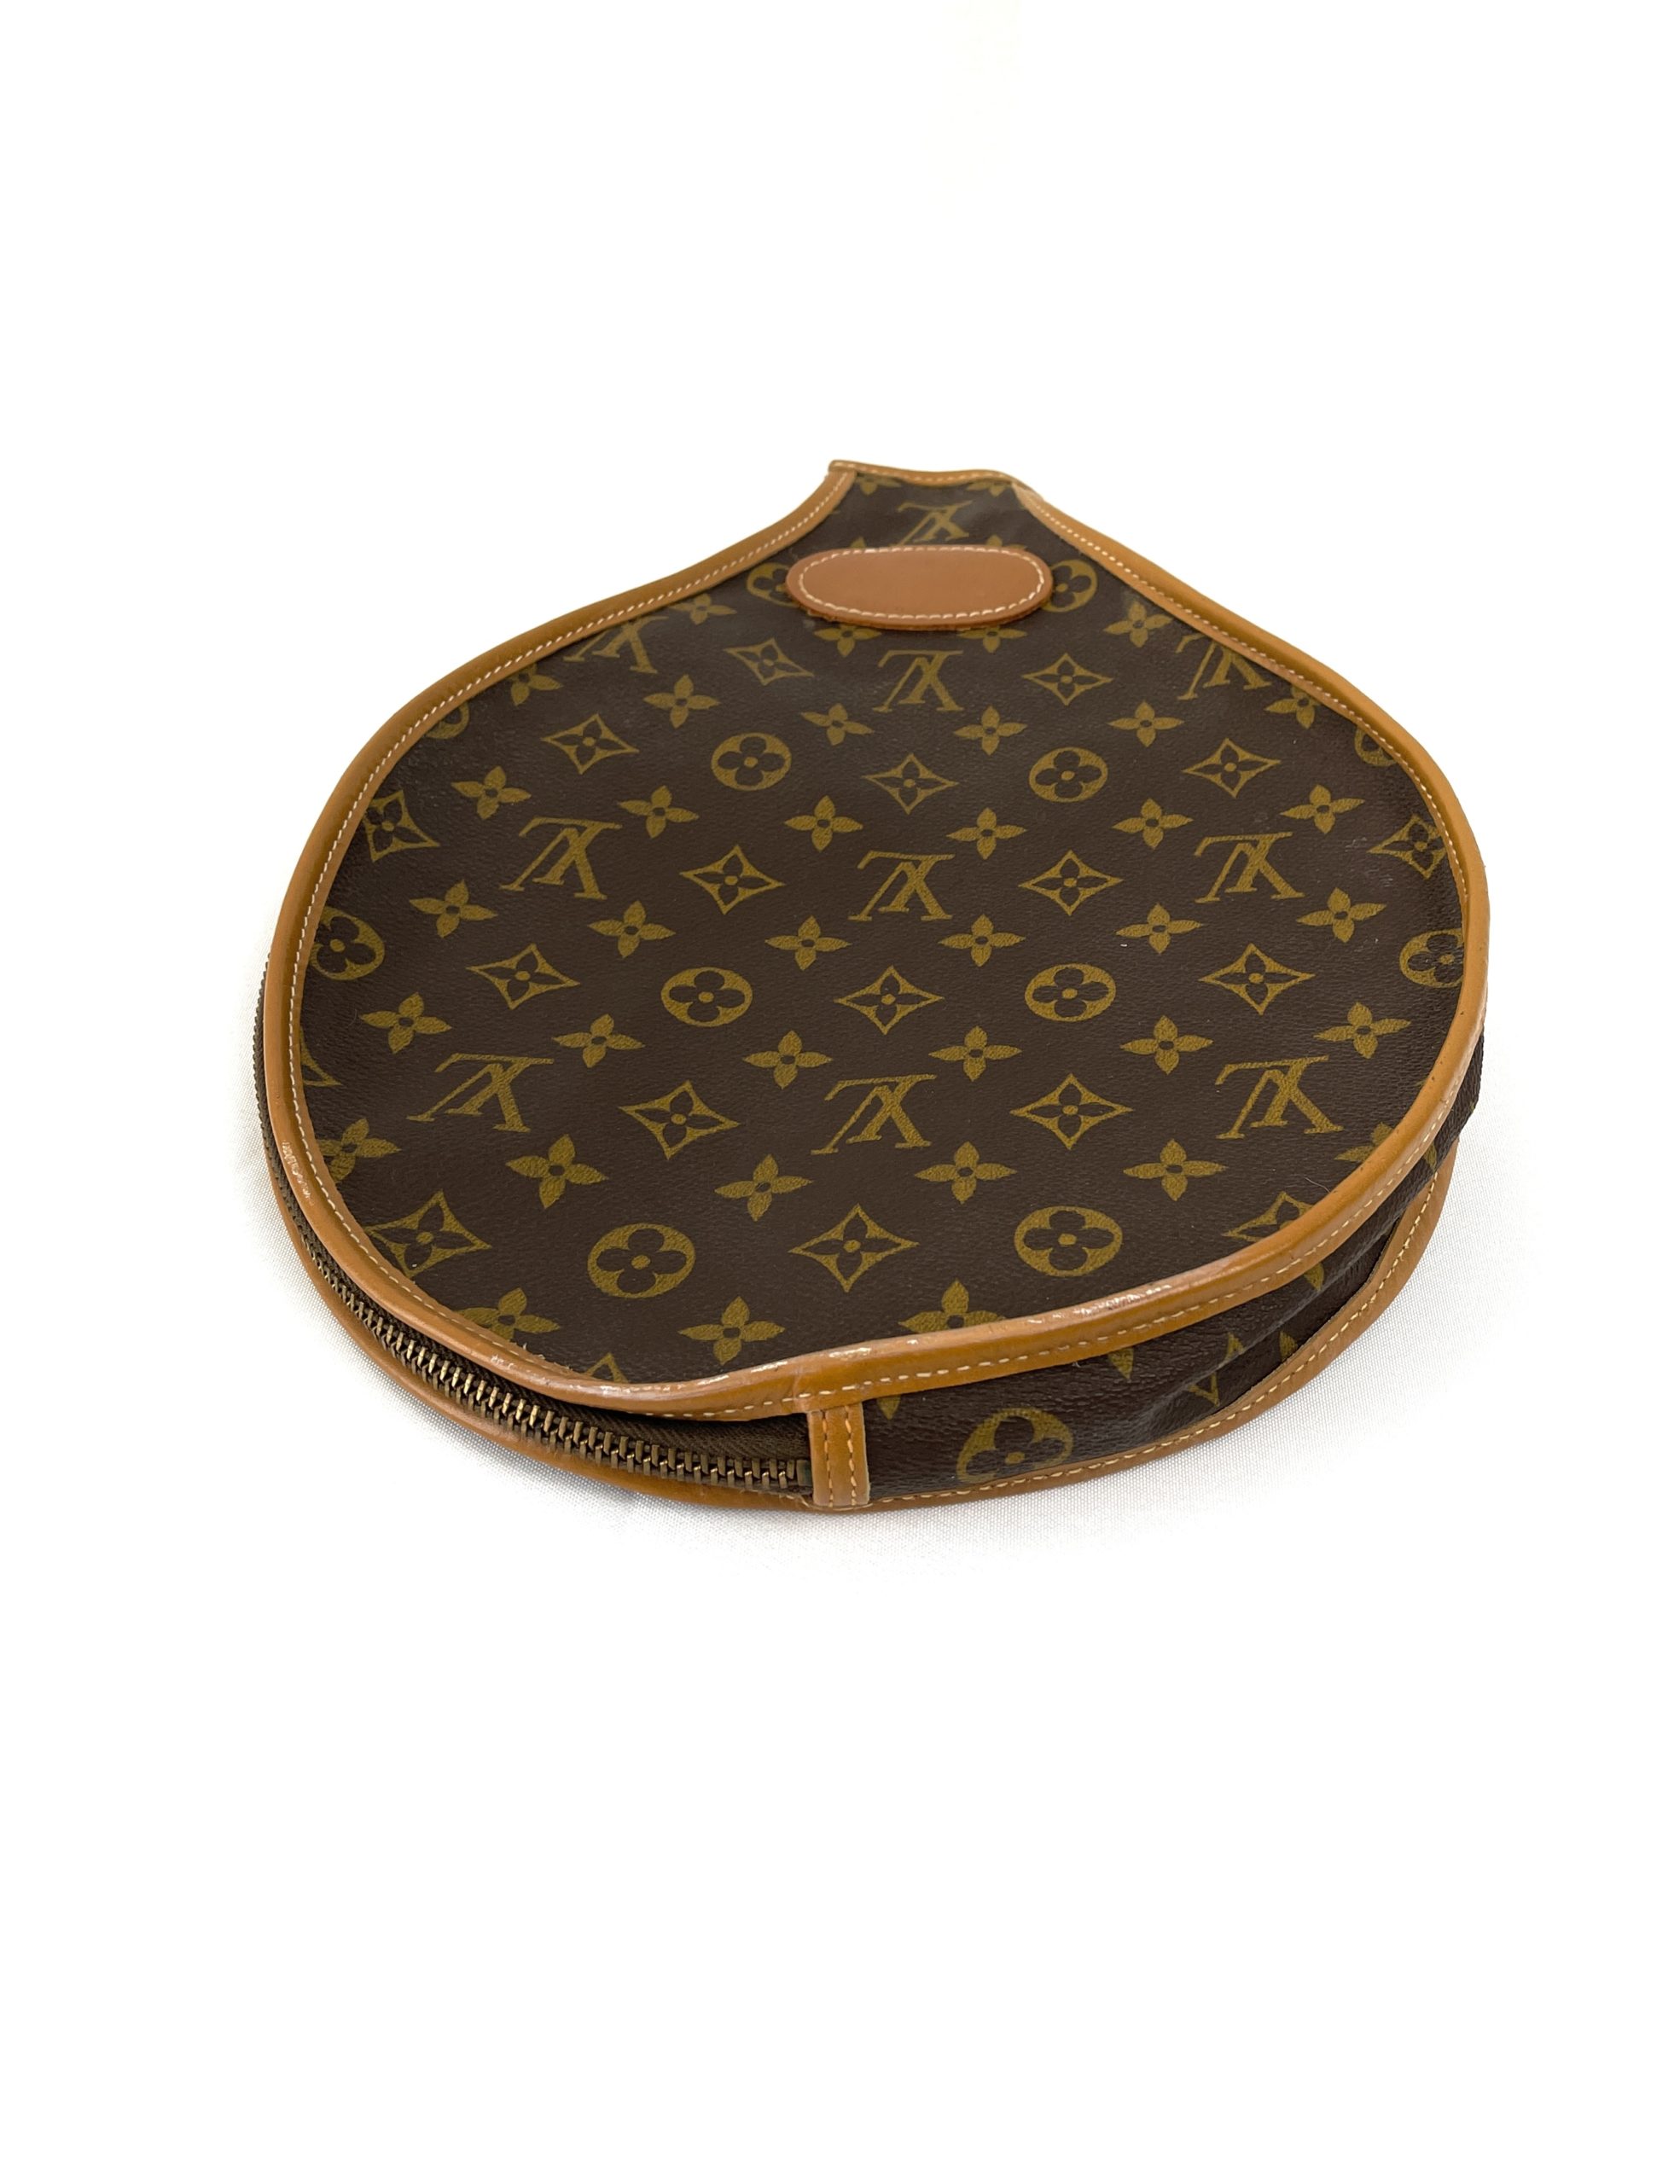 Vintage Louis Vuitton French Company Tennis Racket Cover - A World